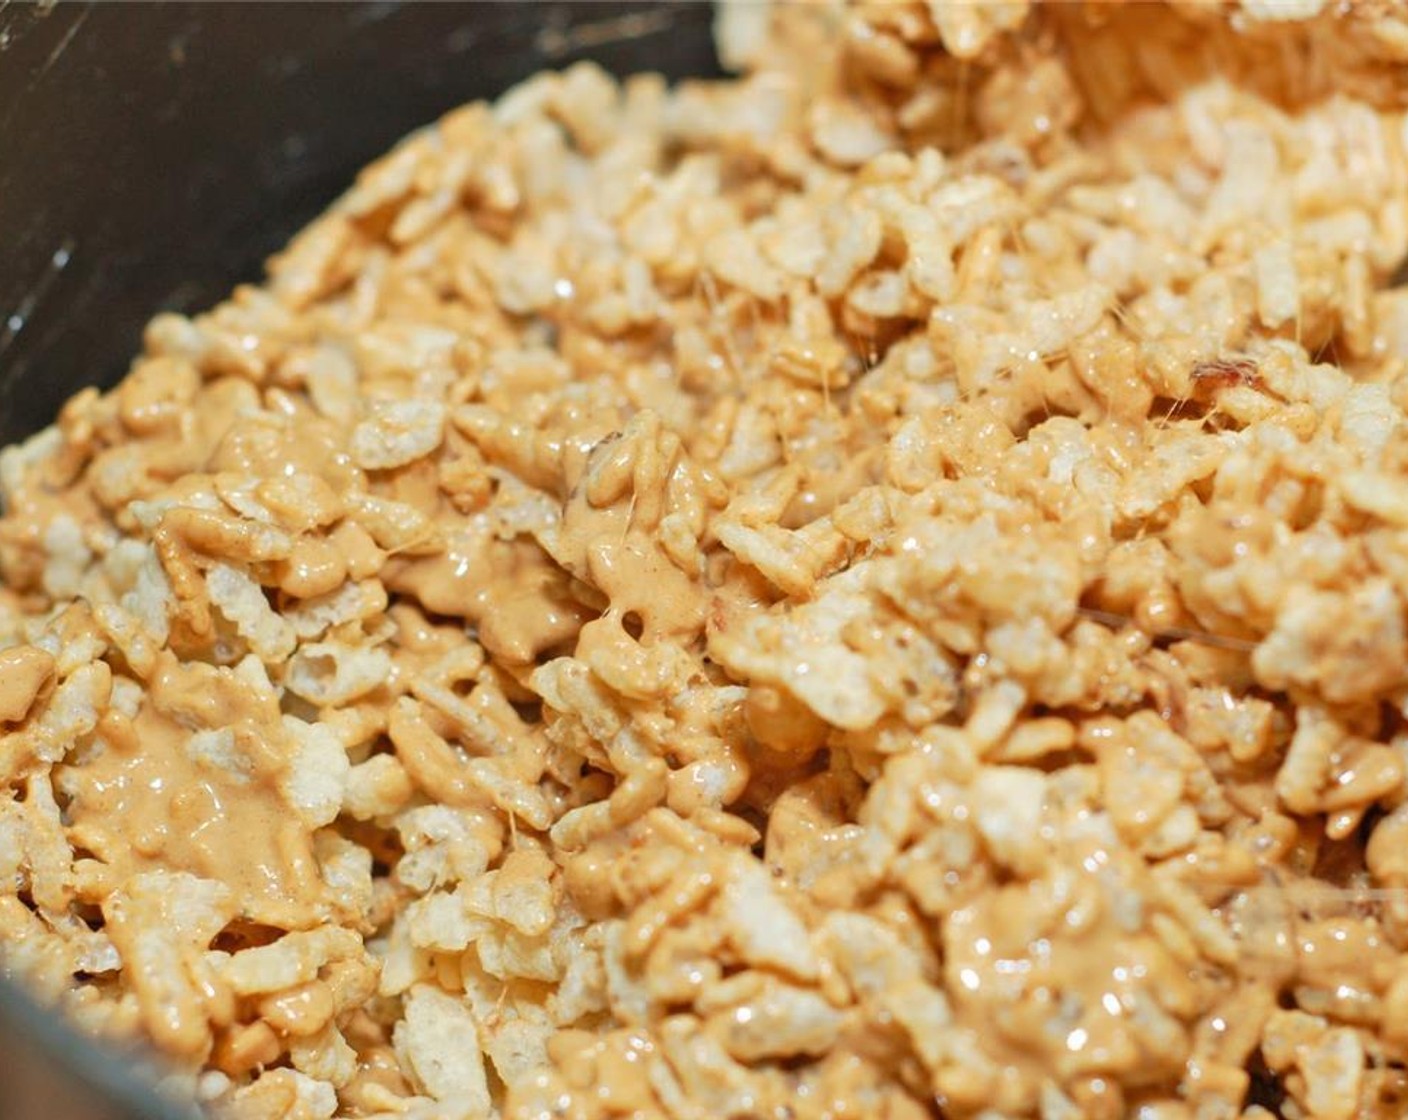 step 4 Then add the Rice Krispies® Cereal (6 cups). Mix until all is well incorporated.